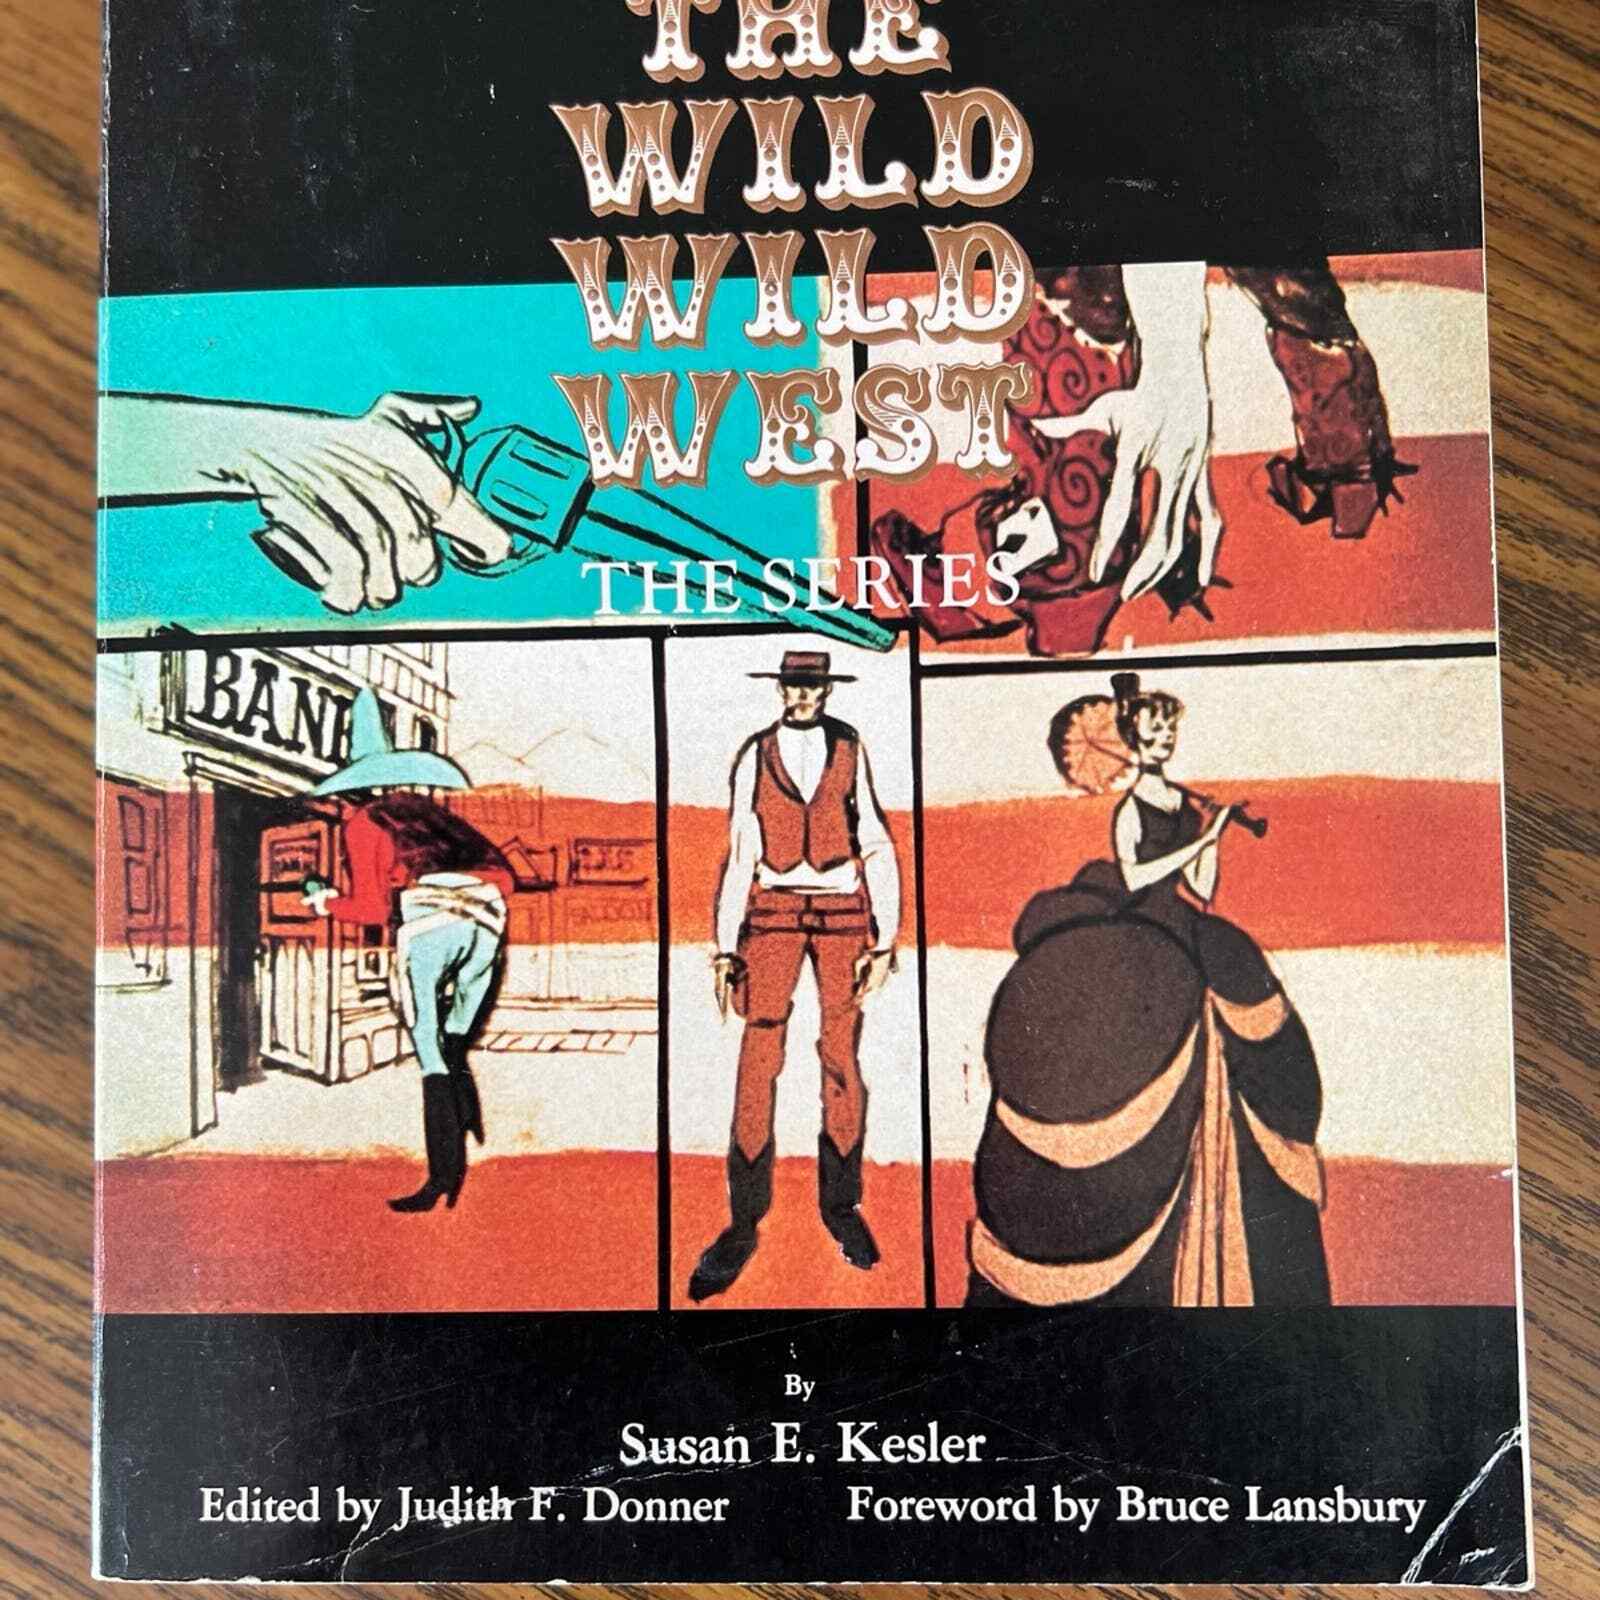 RARE The Wild Wild West first edition book signed by author Susan E. Kesler